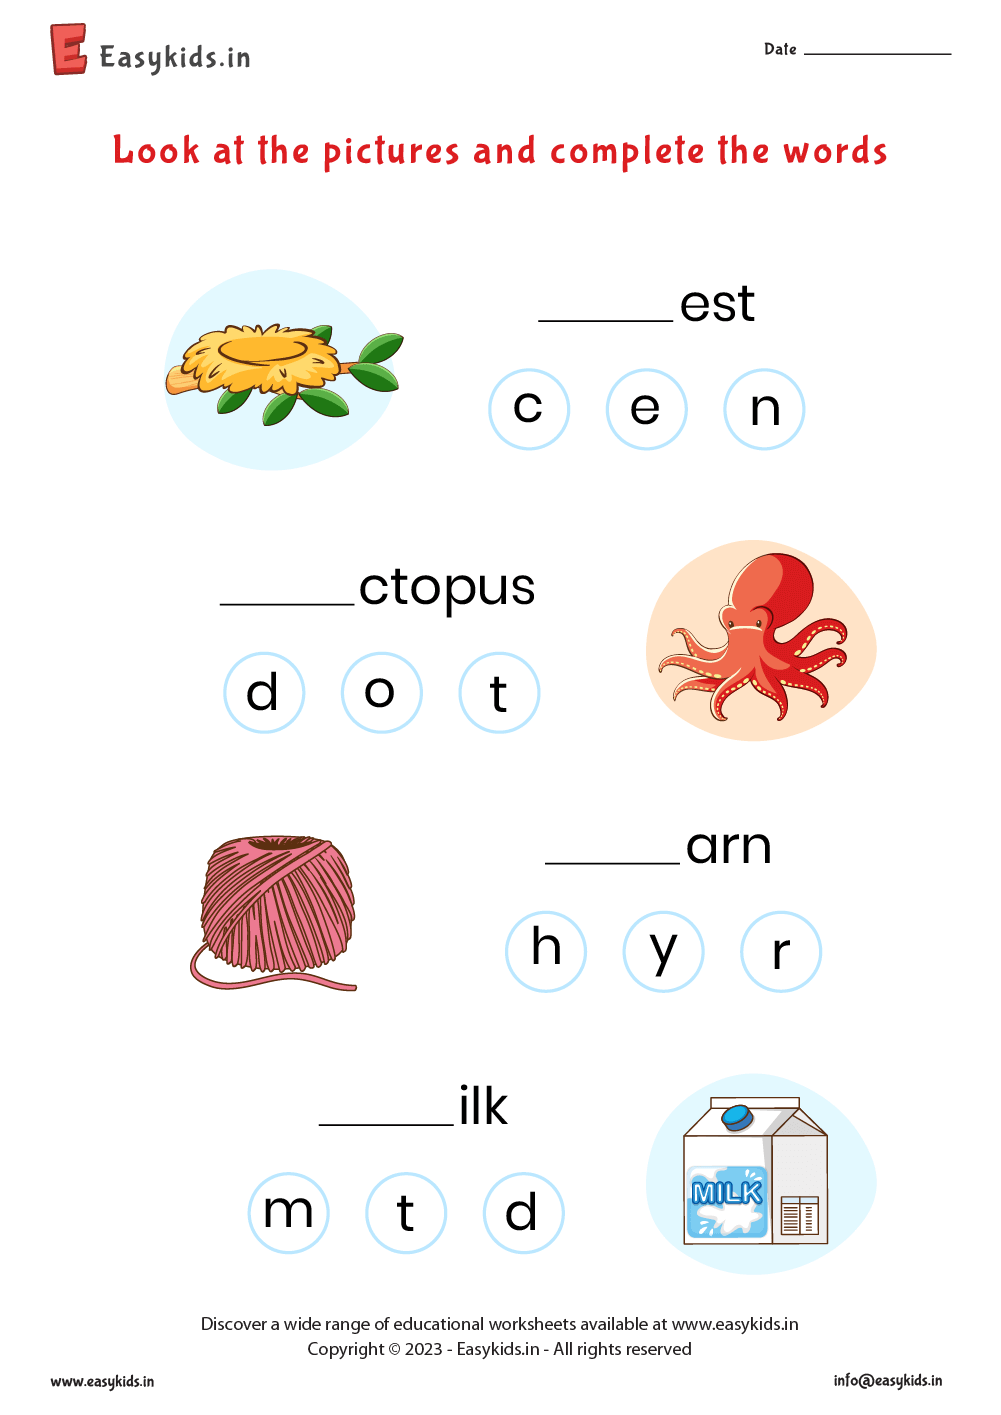 Look at the pictures and complete the words